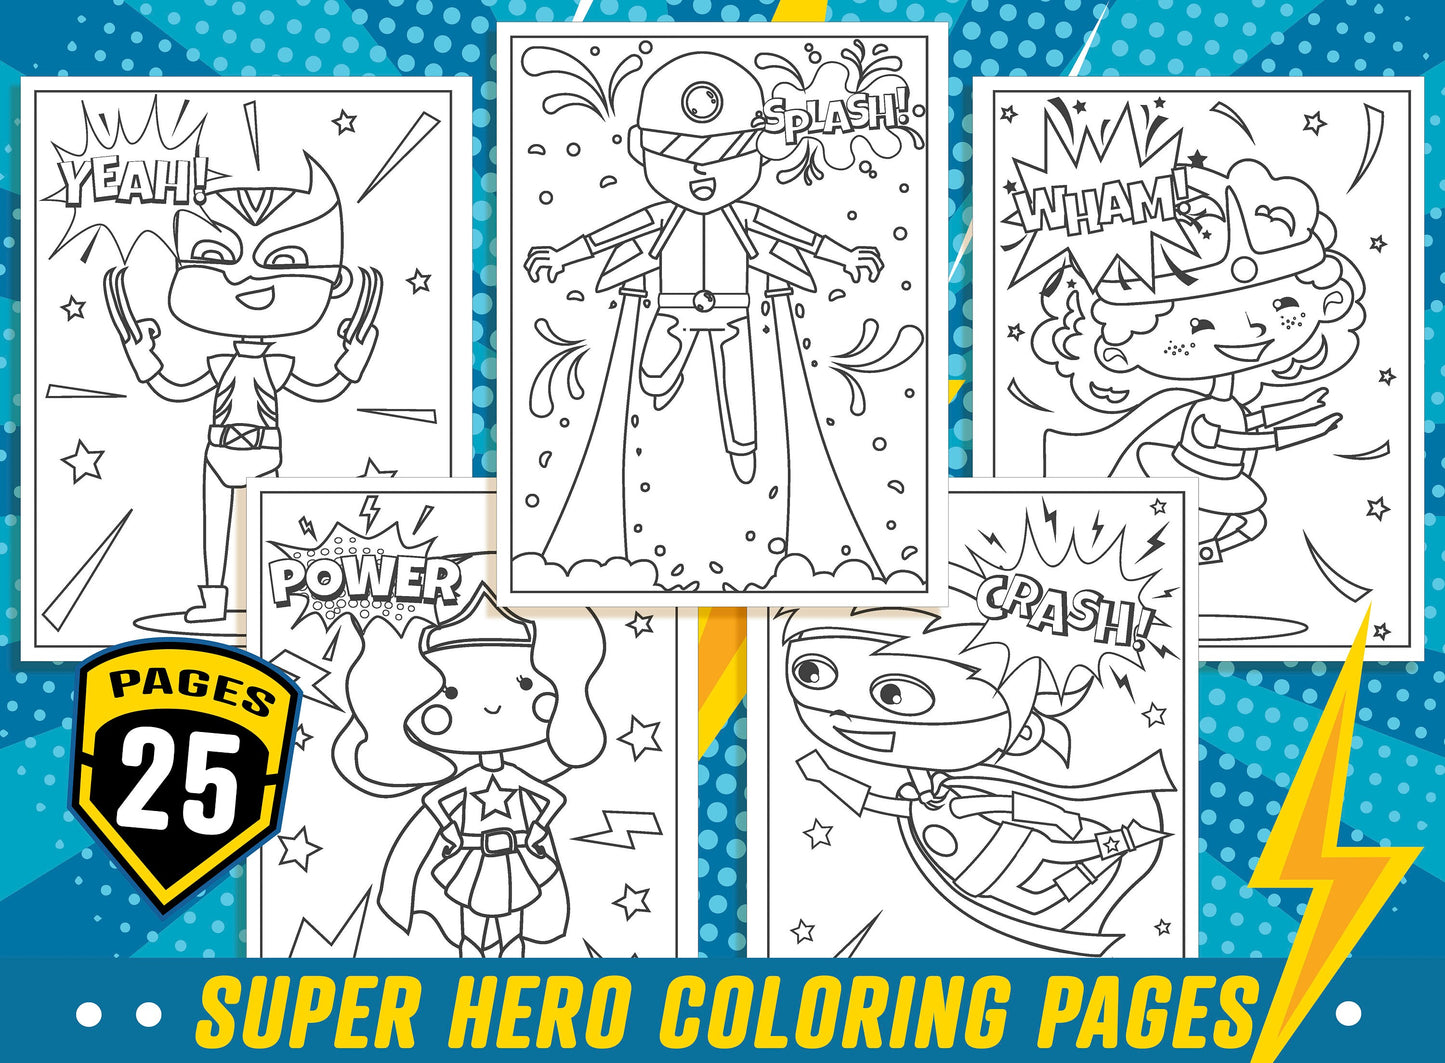 Super Hero Coloring Pages, 25 Printable Super Hero Coloring Pages for Kids, Boys, Girls & Teens. Super Hero Party Activity, Kids Super Hero